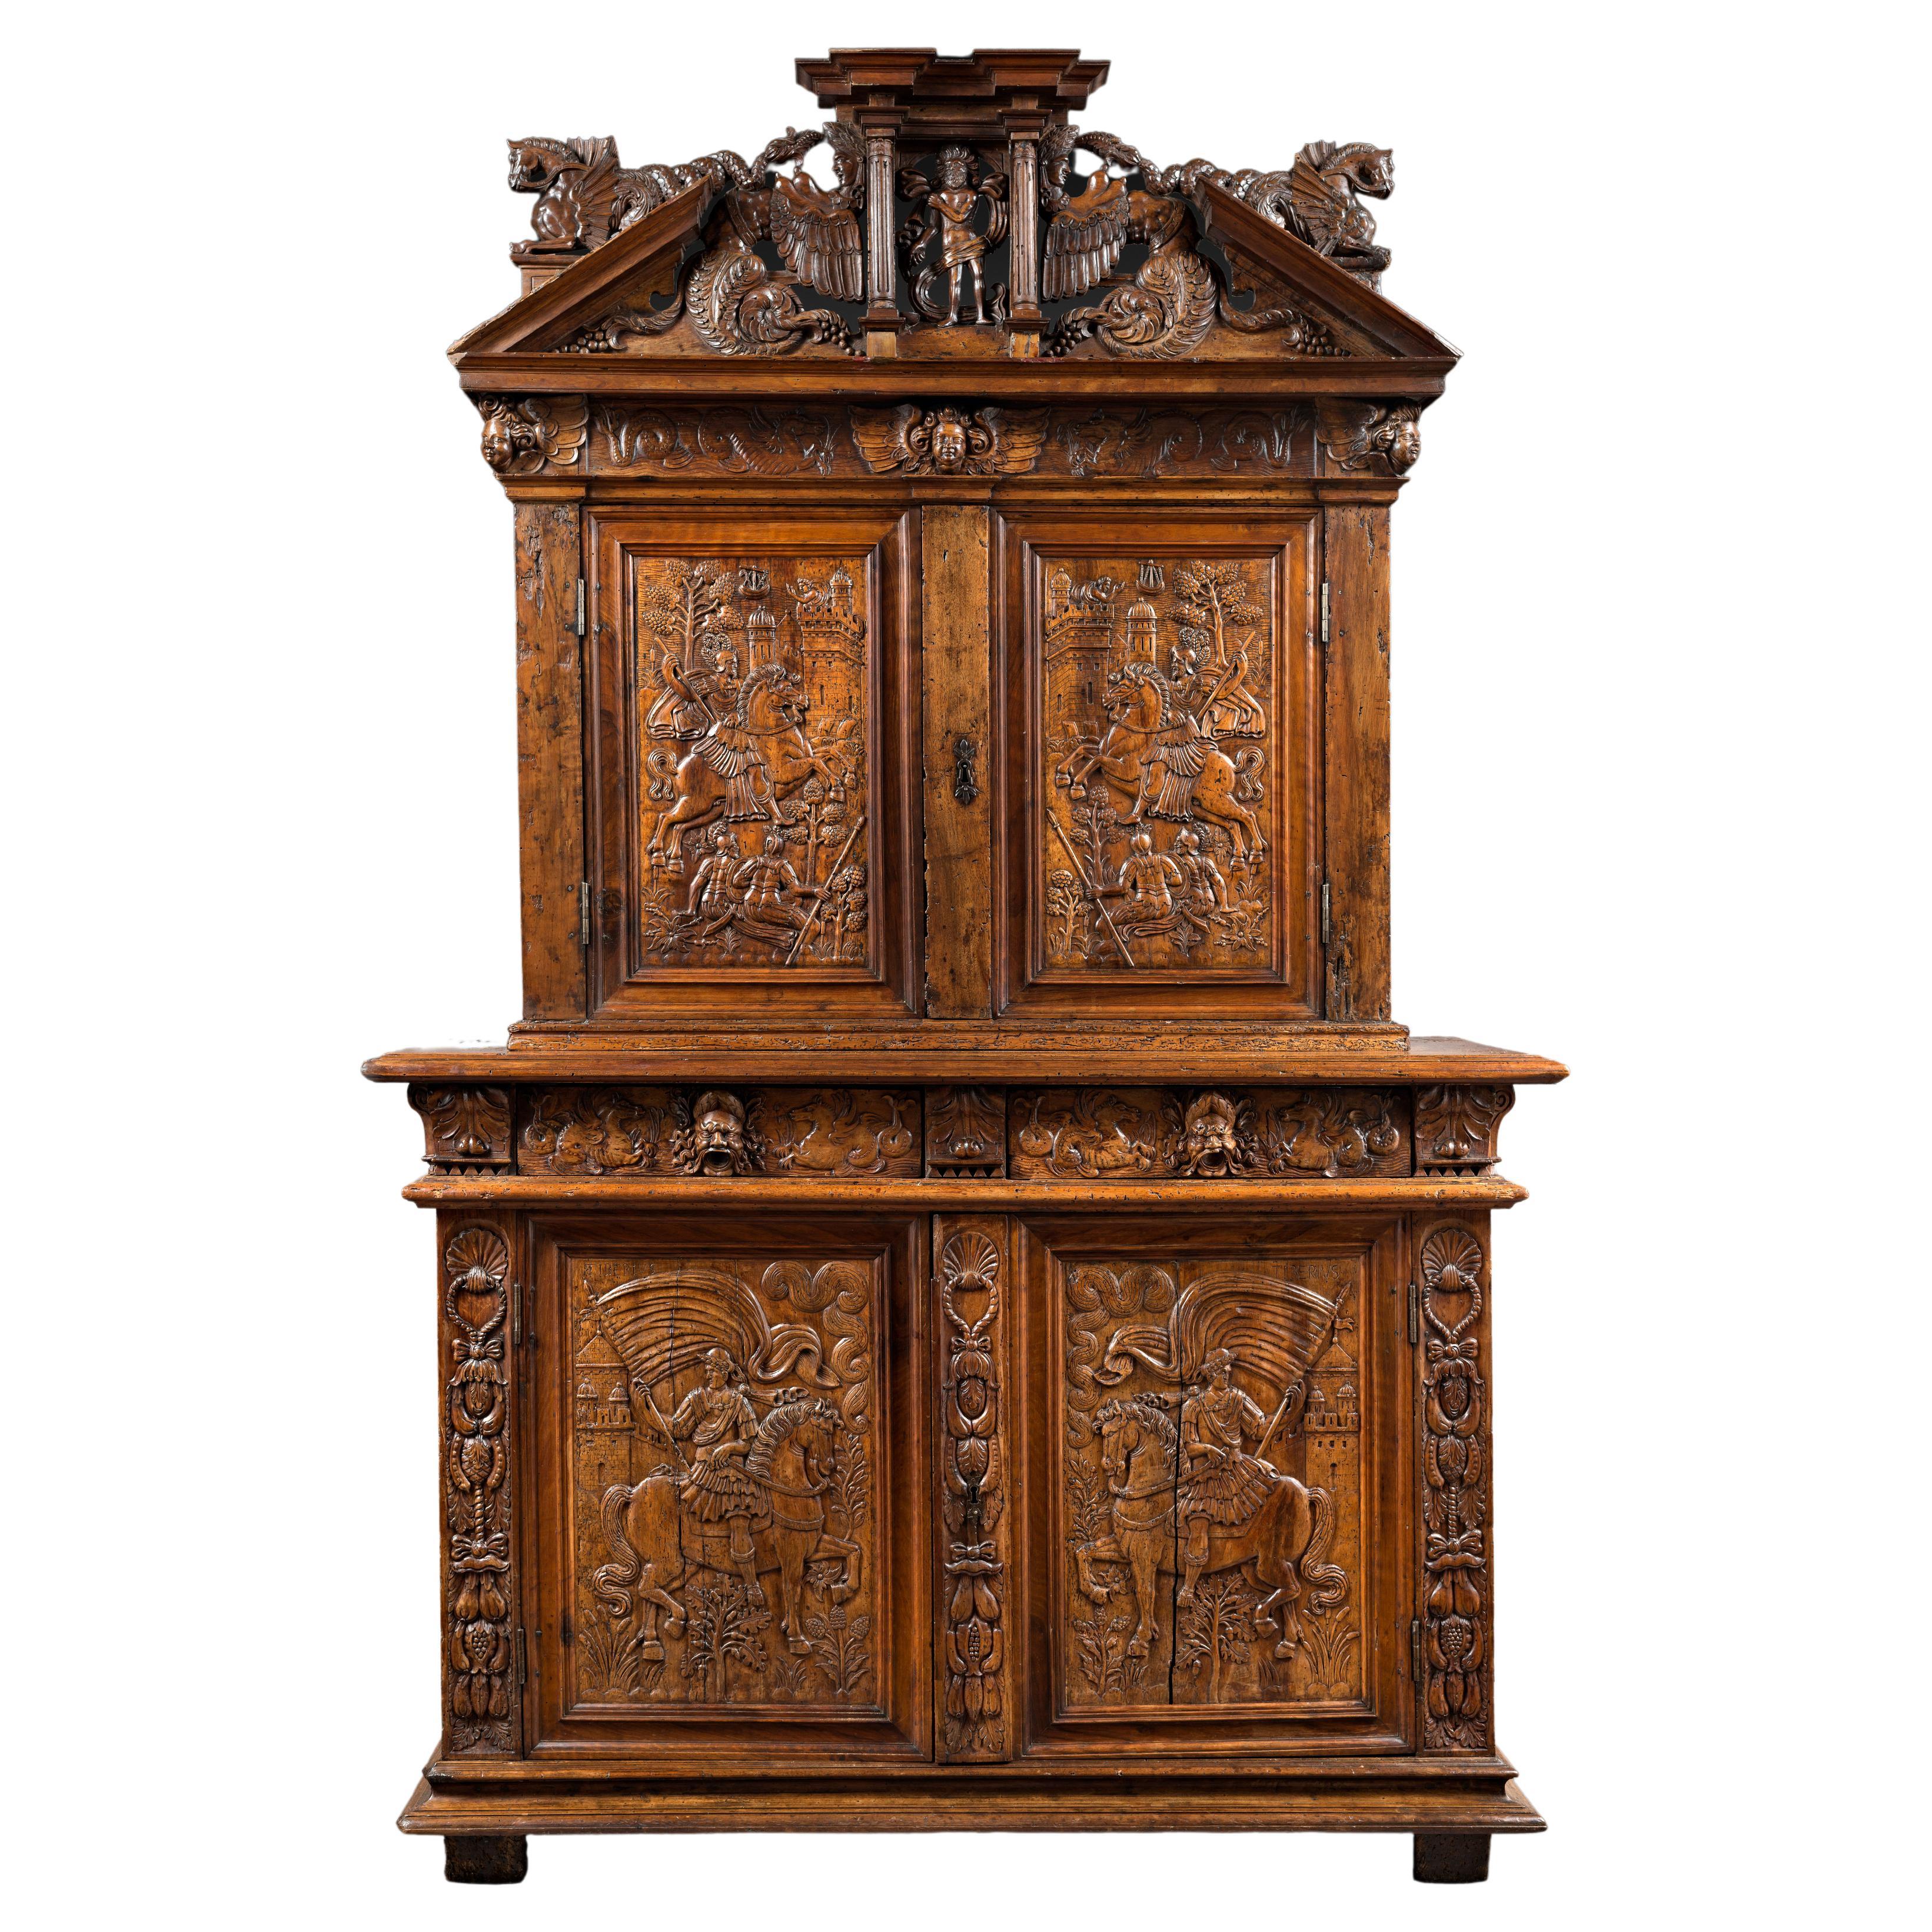 16th Century Cabinet with Knights Carving from Avignon Workshops 'France' For Sale